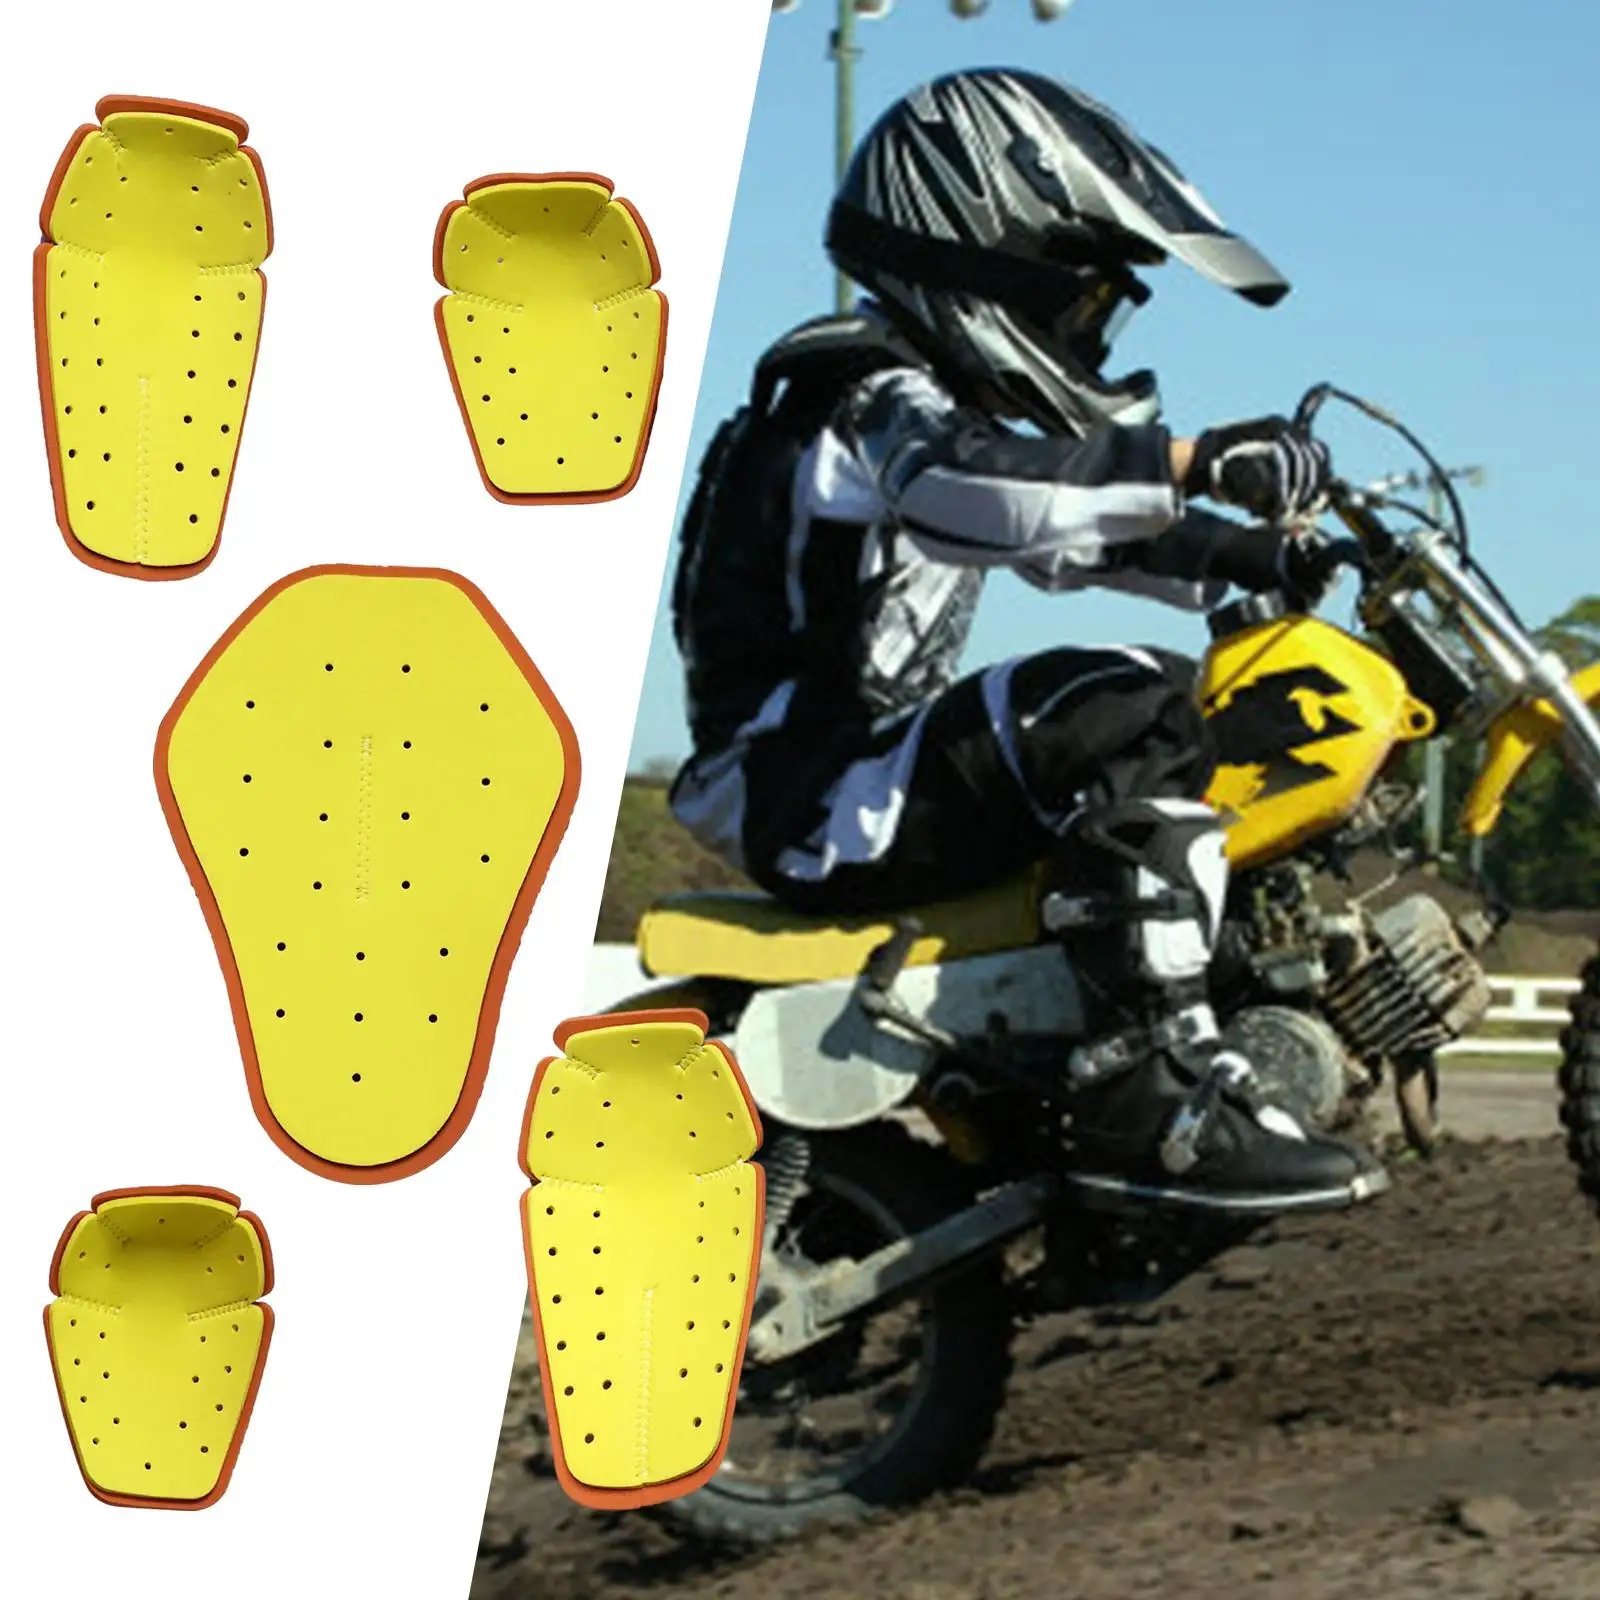 Motorbike Body Protective Gear Motorcycle Racing Riding for Motocross